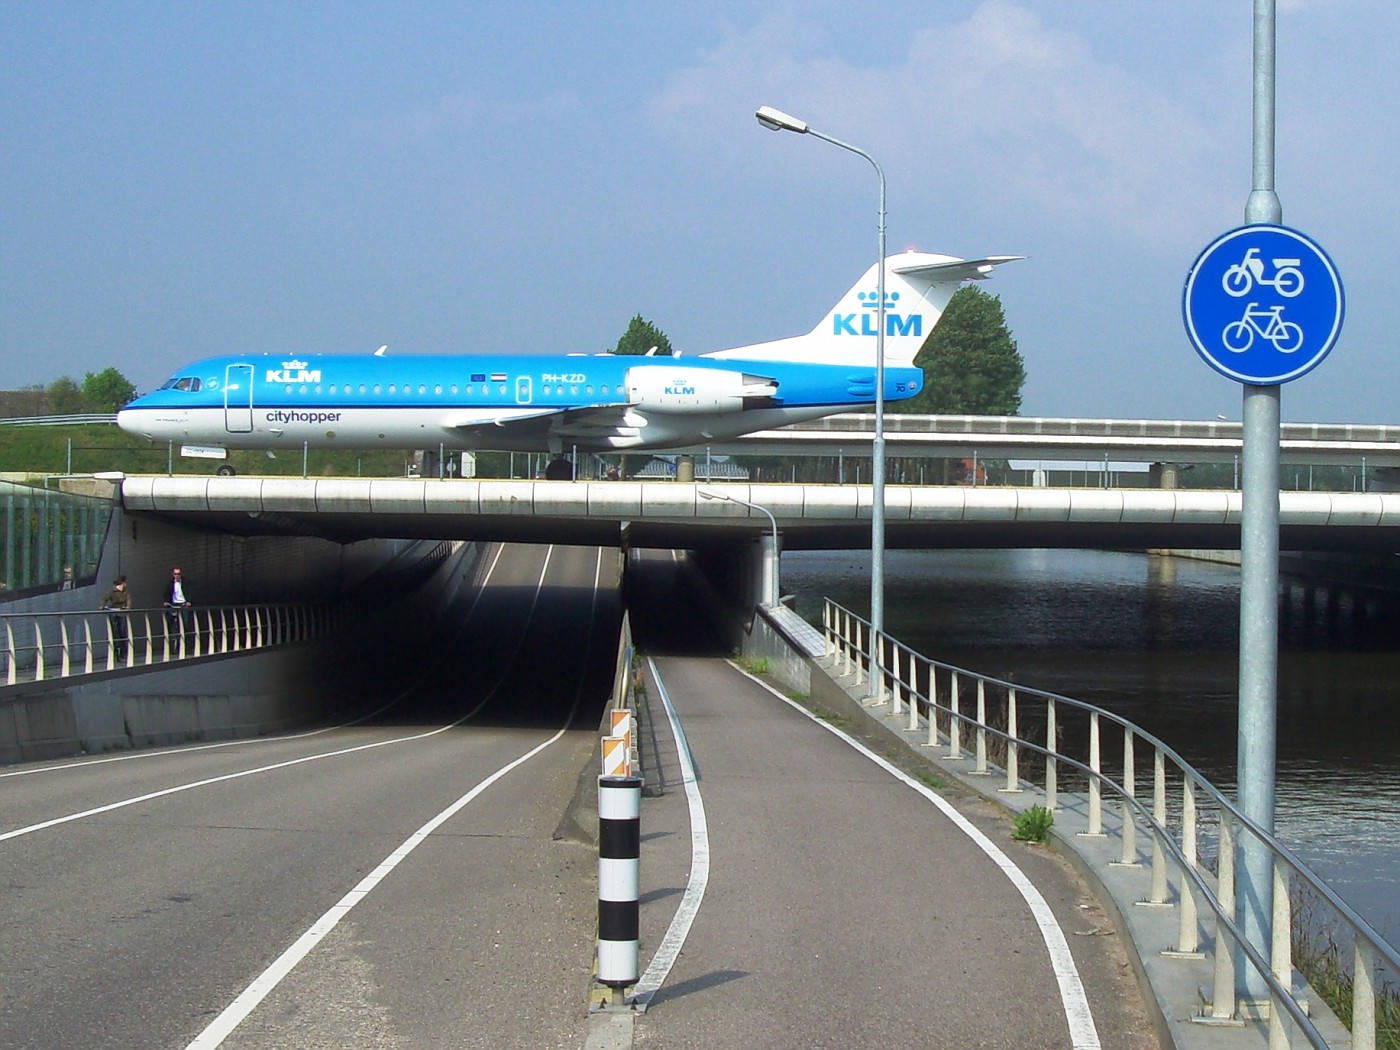 Airplane crosses cycle track